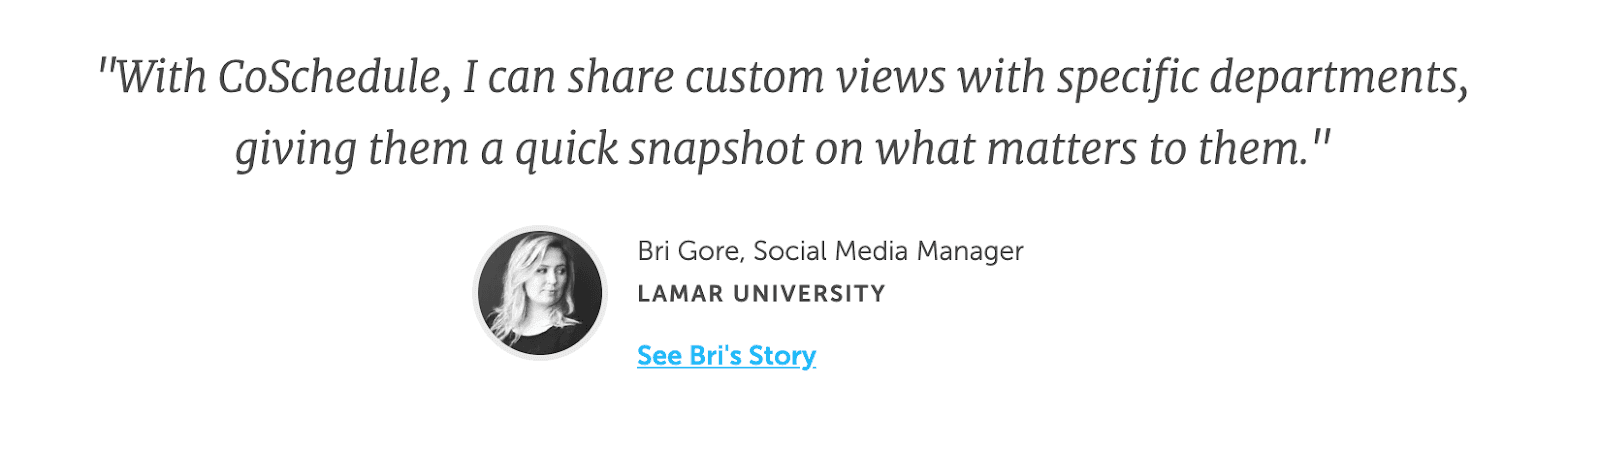 Quote from social media manager Bri Gore saying "with CoSchedule I can share custom views with specific departments, giving them a quick snapshot on what matters to them."